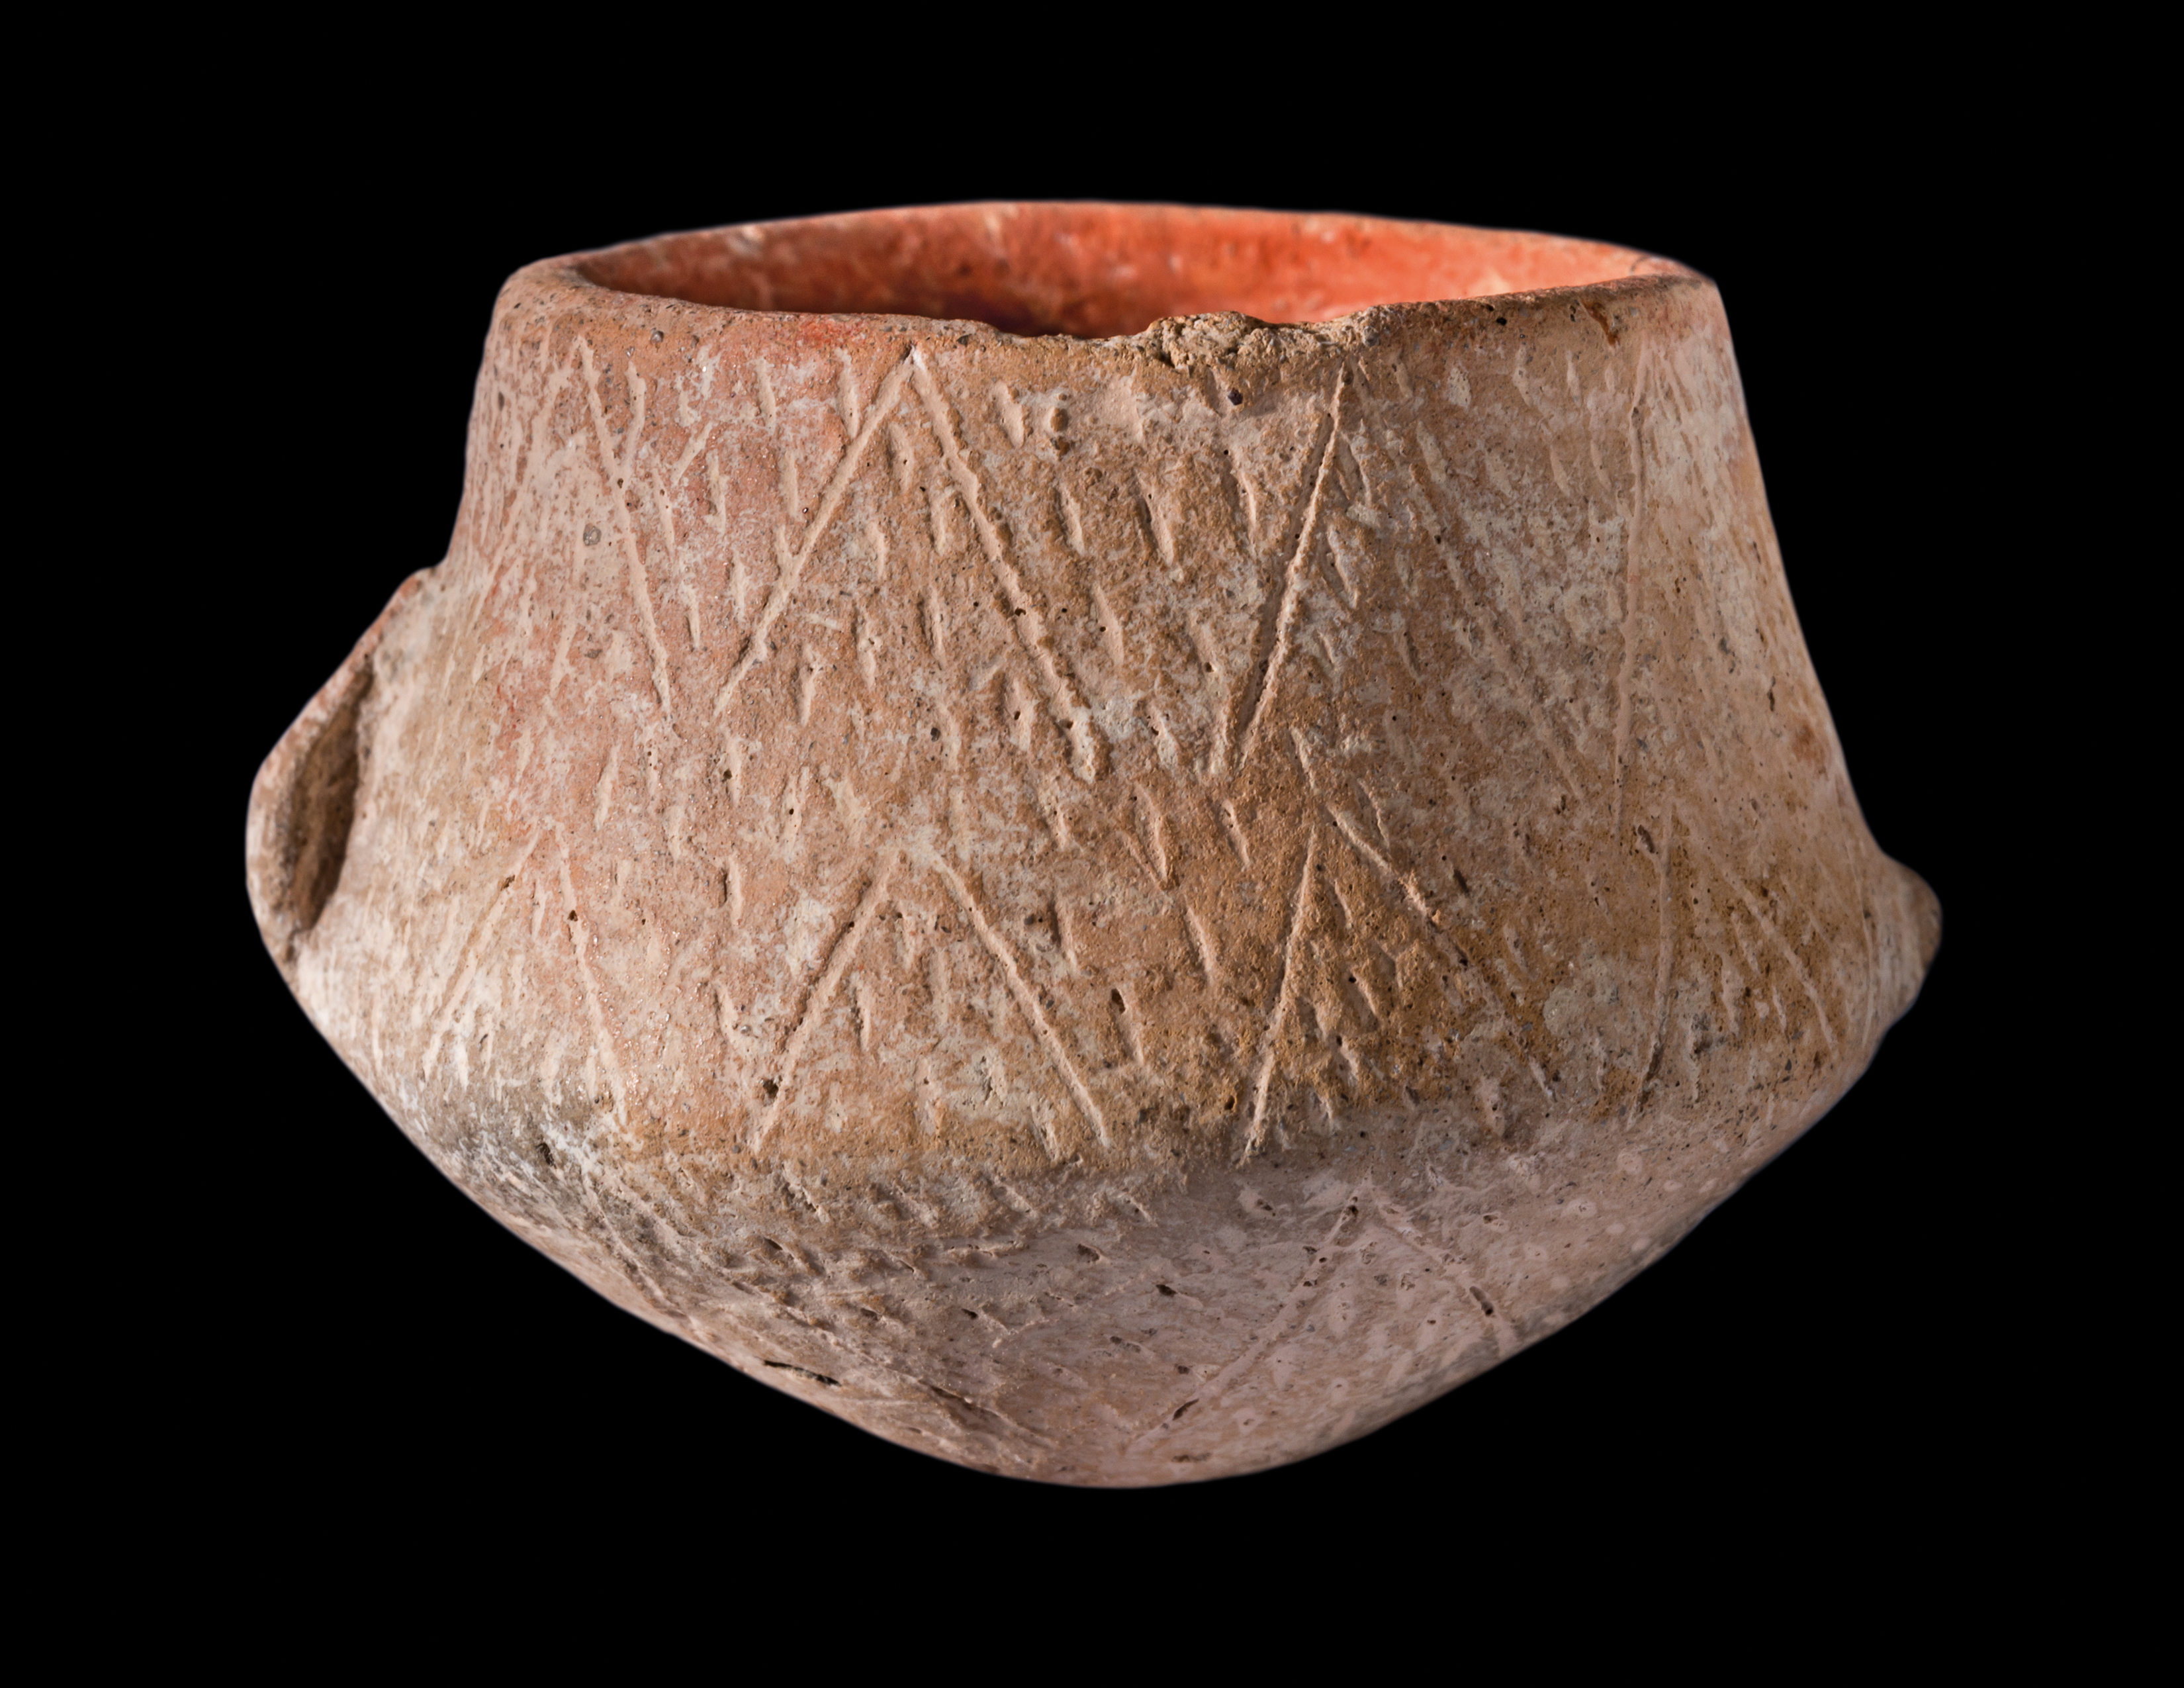 Pot with Red Ochre Stained Interior